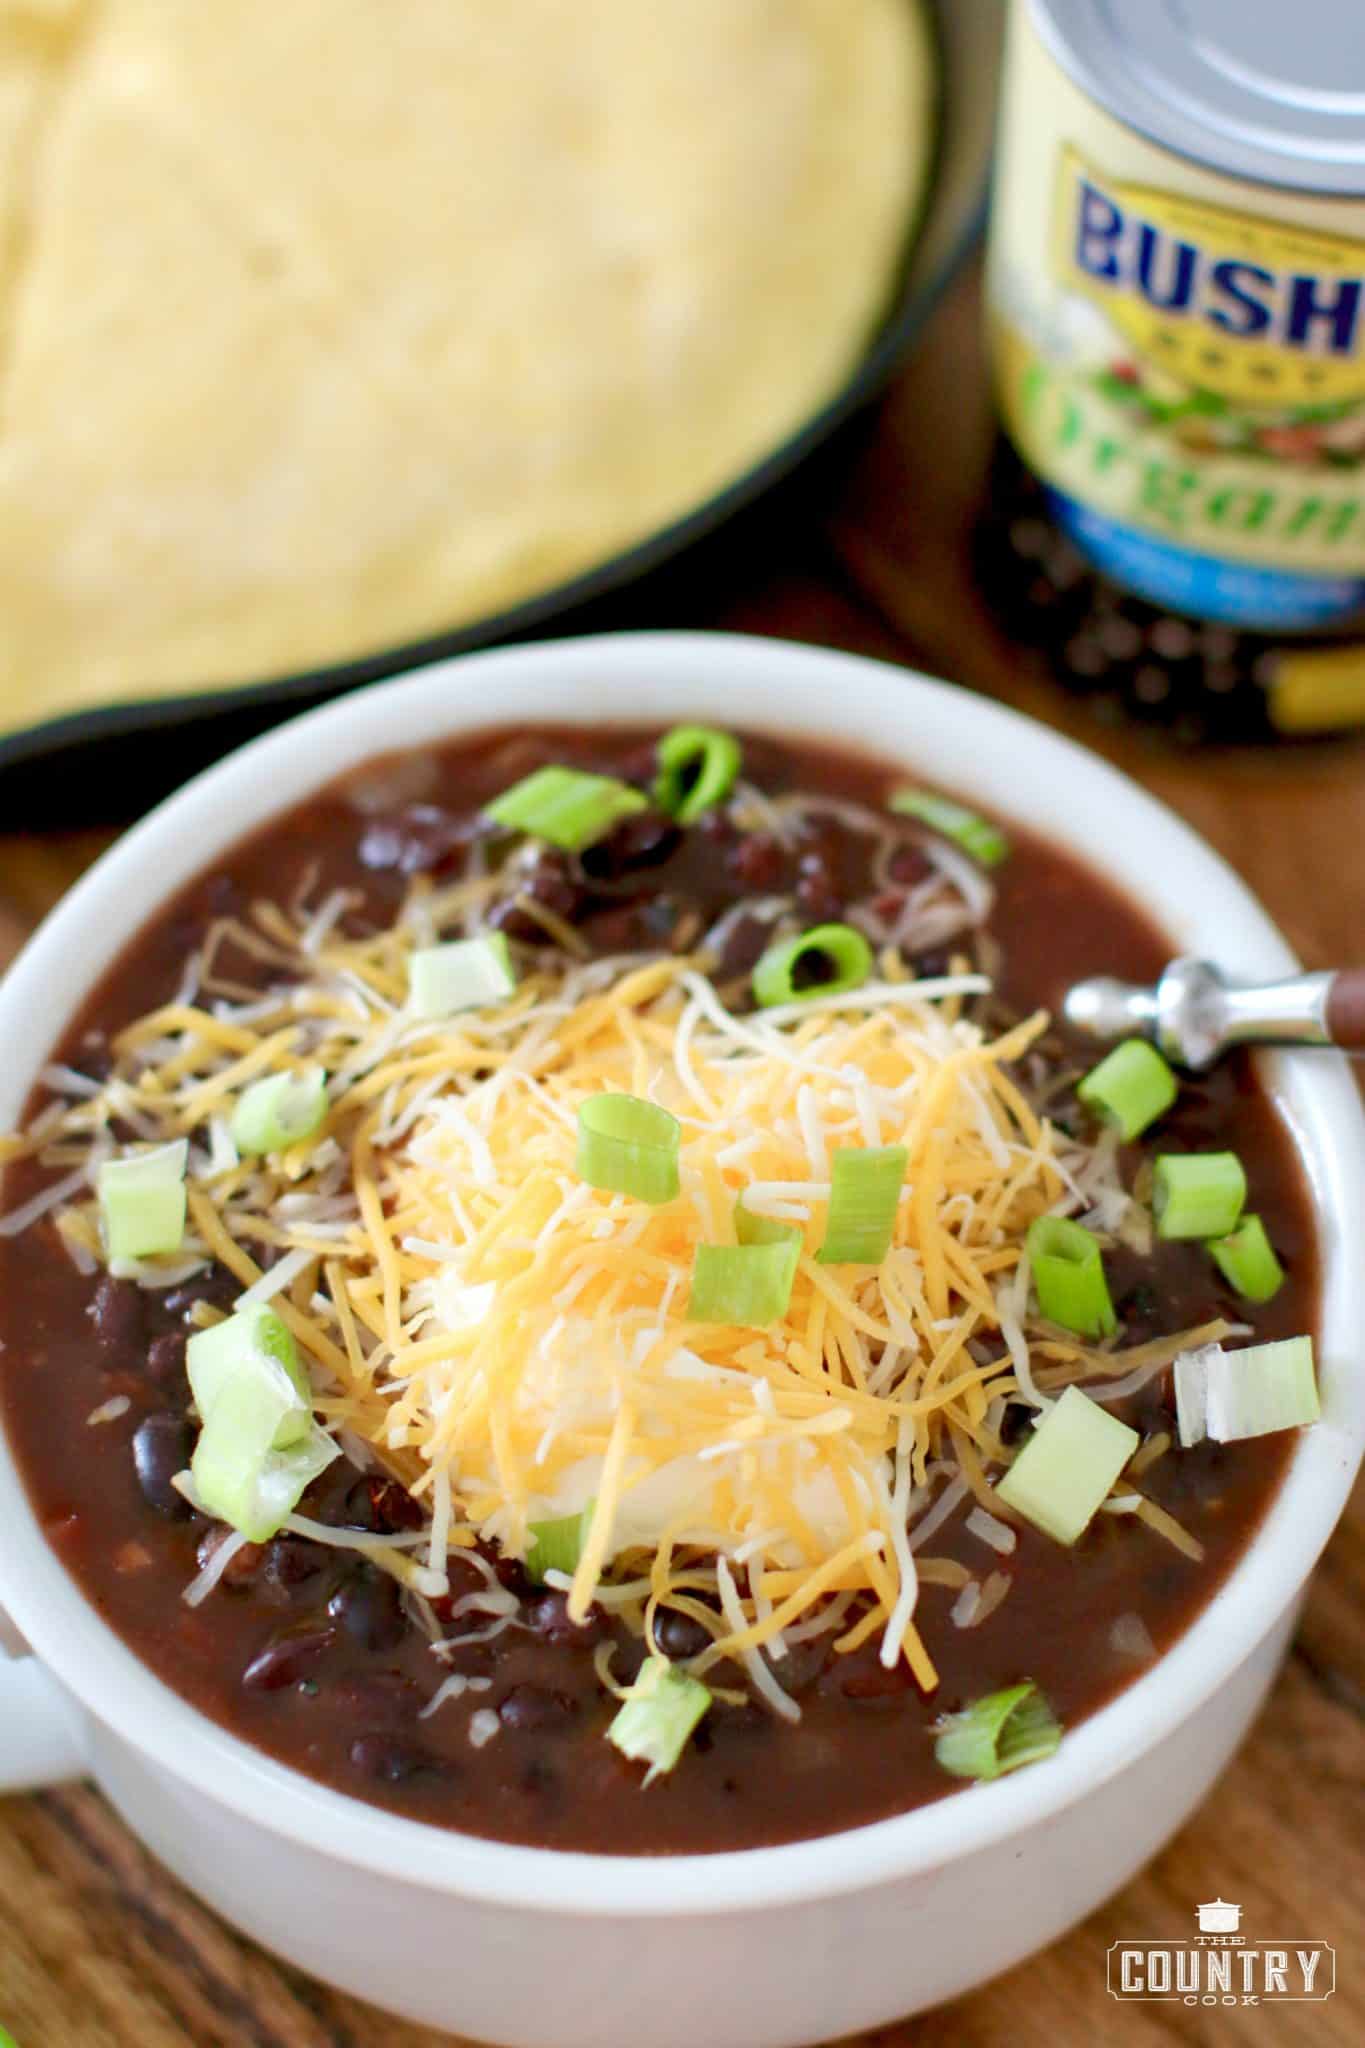 Black Bean Chili in a bowl topped with shredded cheese and green onions with a pan of cornbread in the background.